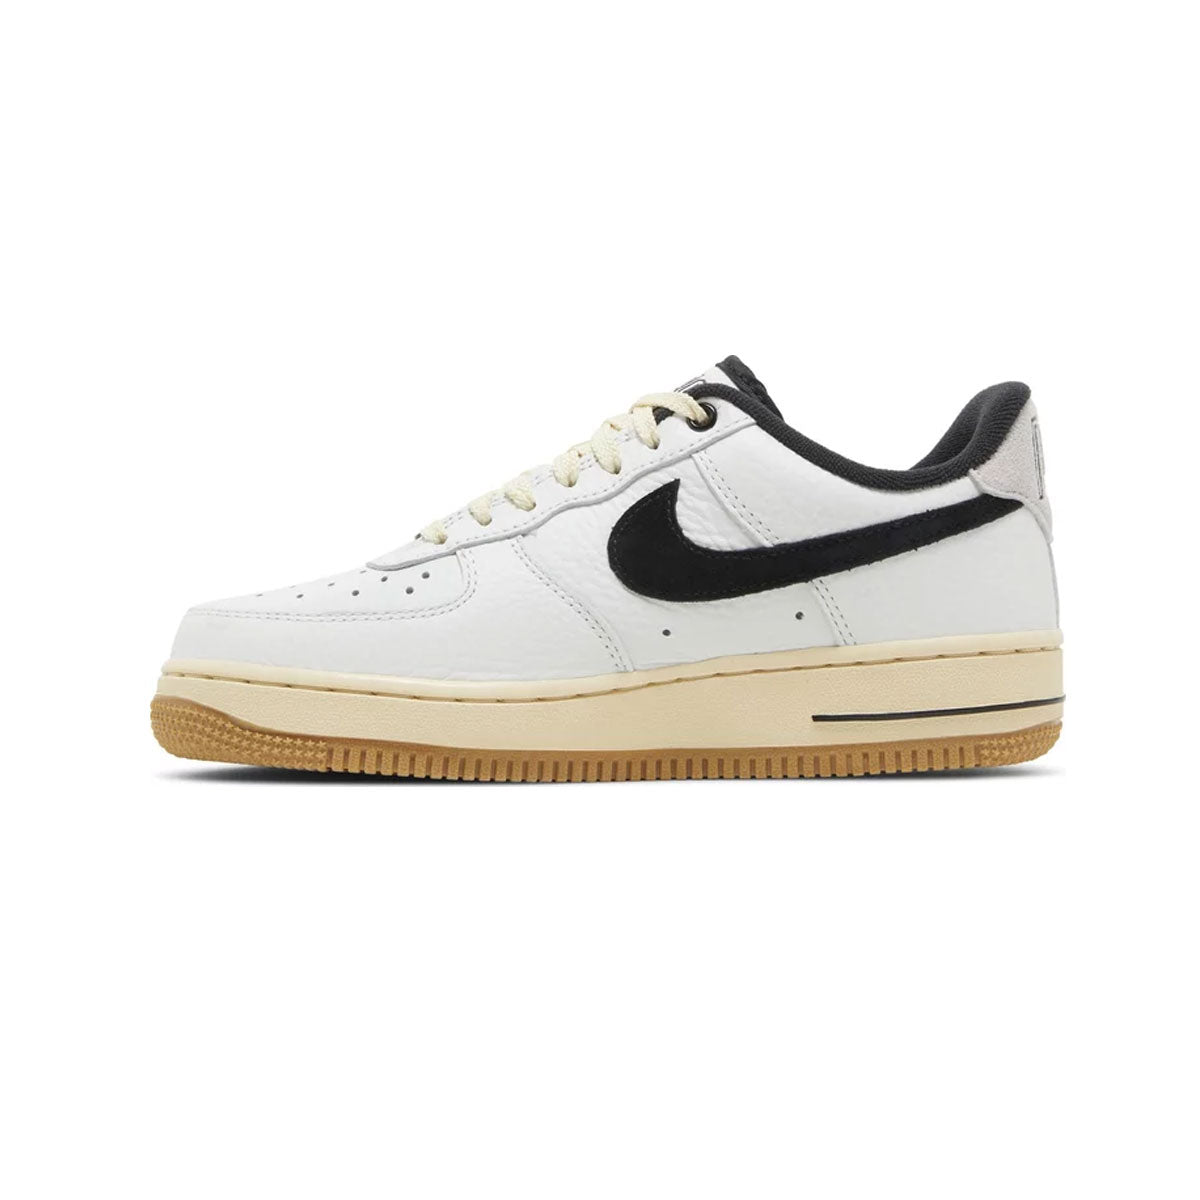 Nike Women's Air Force 1 '07 LX Low Command Force